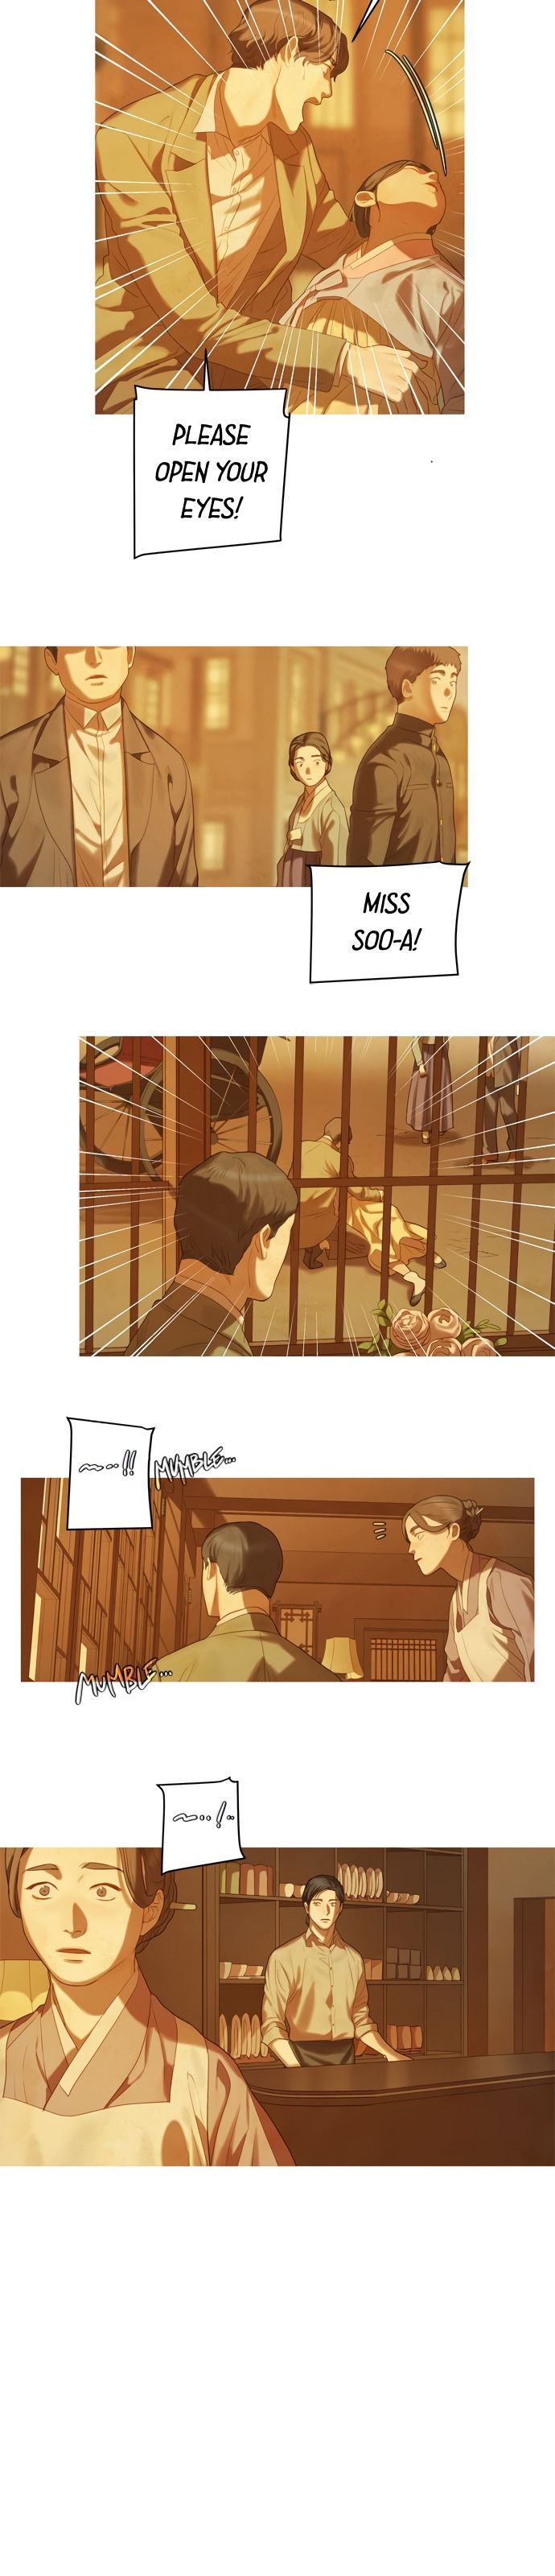 Gorae Byul - The Gyeongseong Mermaid - Chapter 18 Page 6